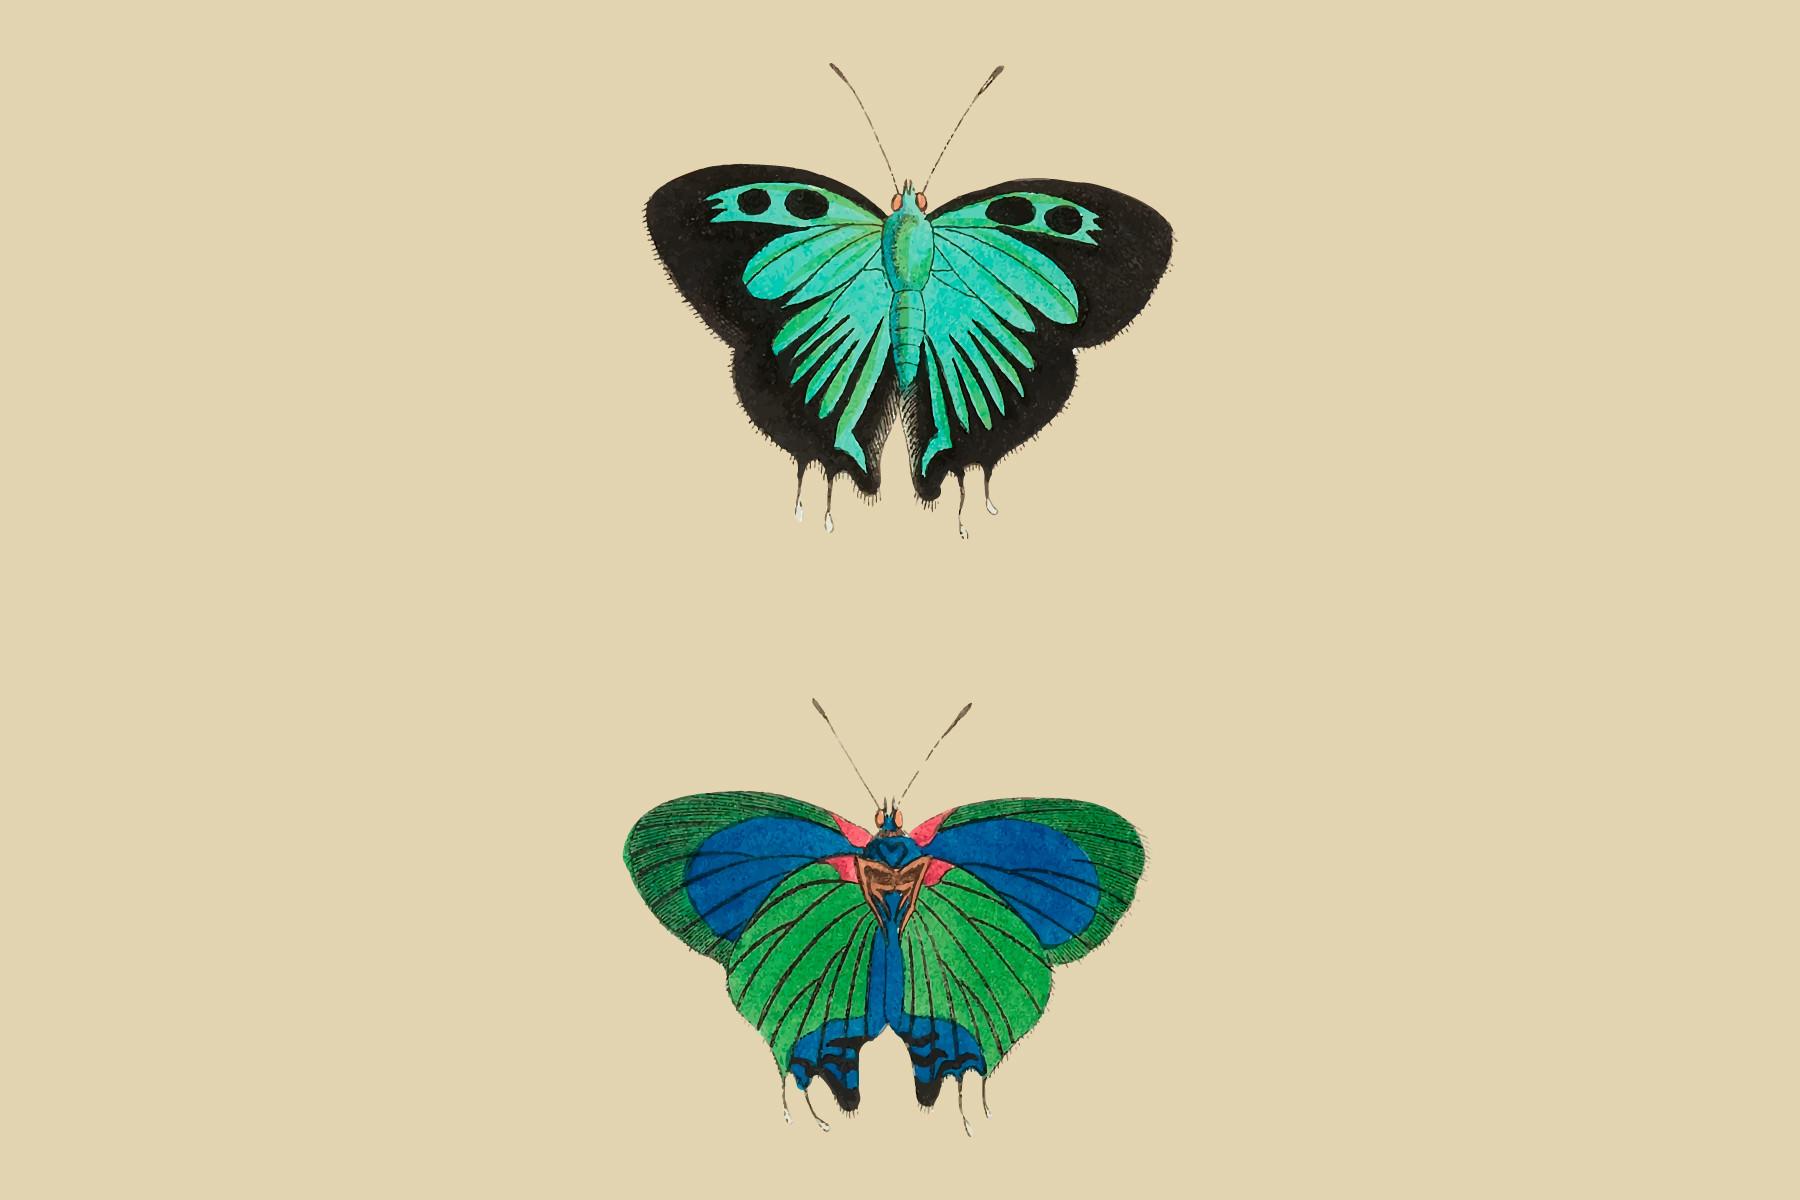 Atys or Black Double-tailed Butterfly